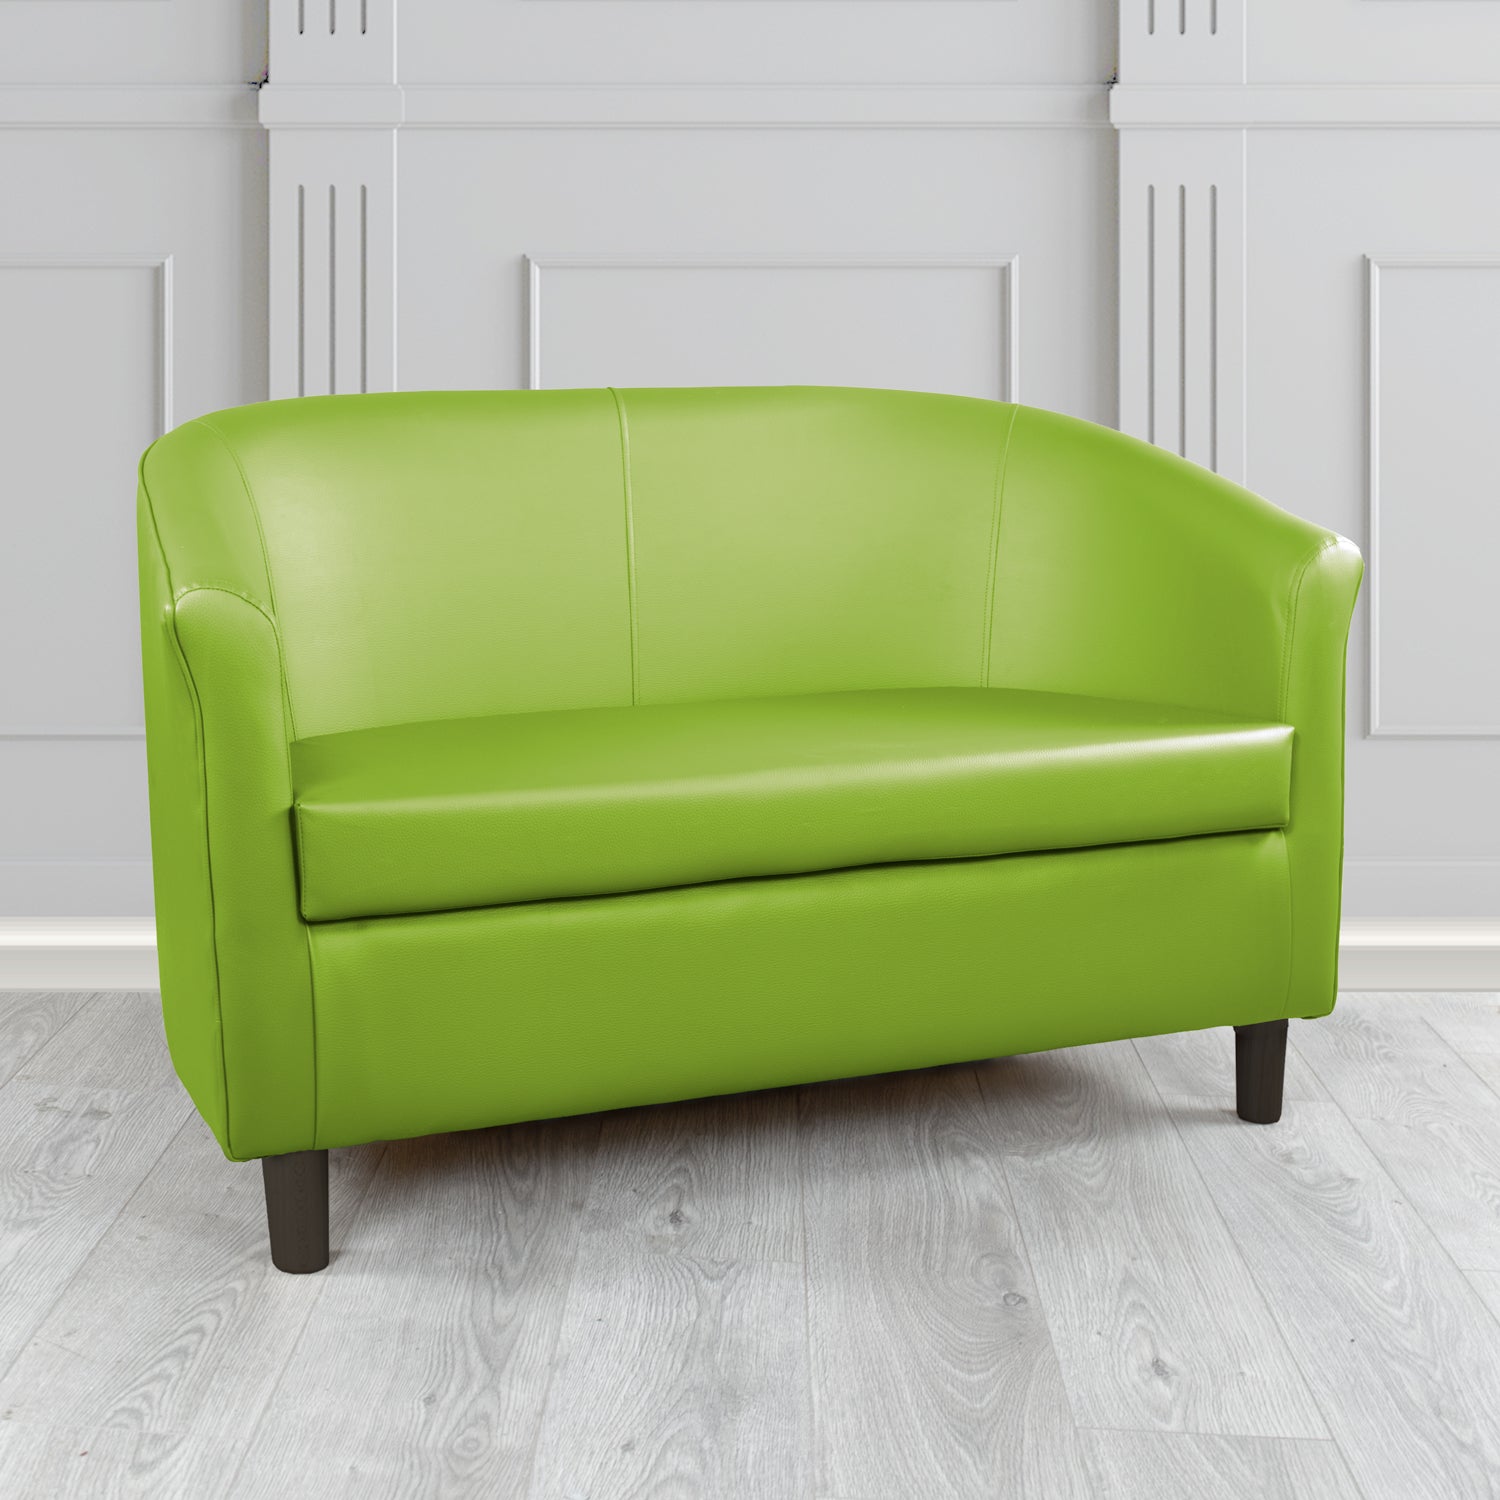 Tuscany Just Colour Citrus Green Crib 5 Faux Leather 2 Seater Tub Sofa - The Tub Chair Shop